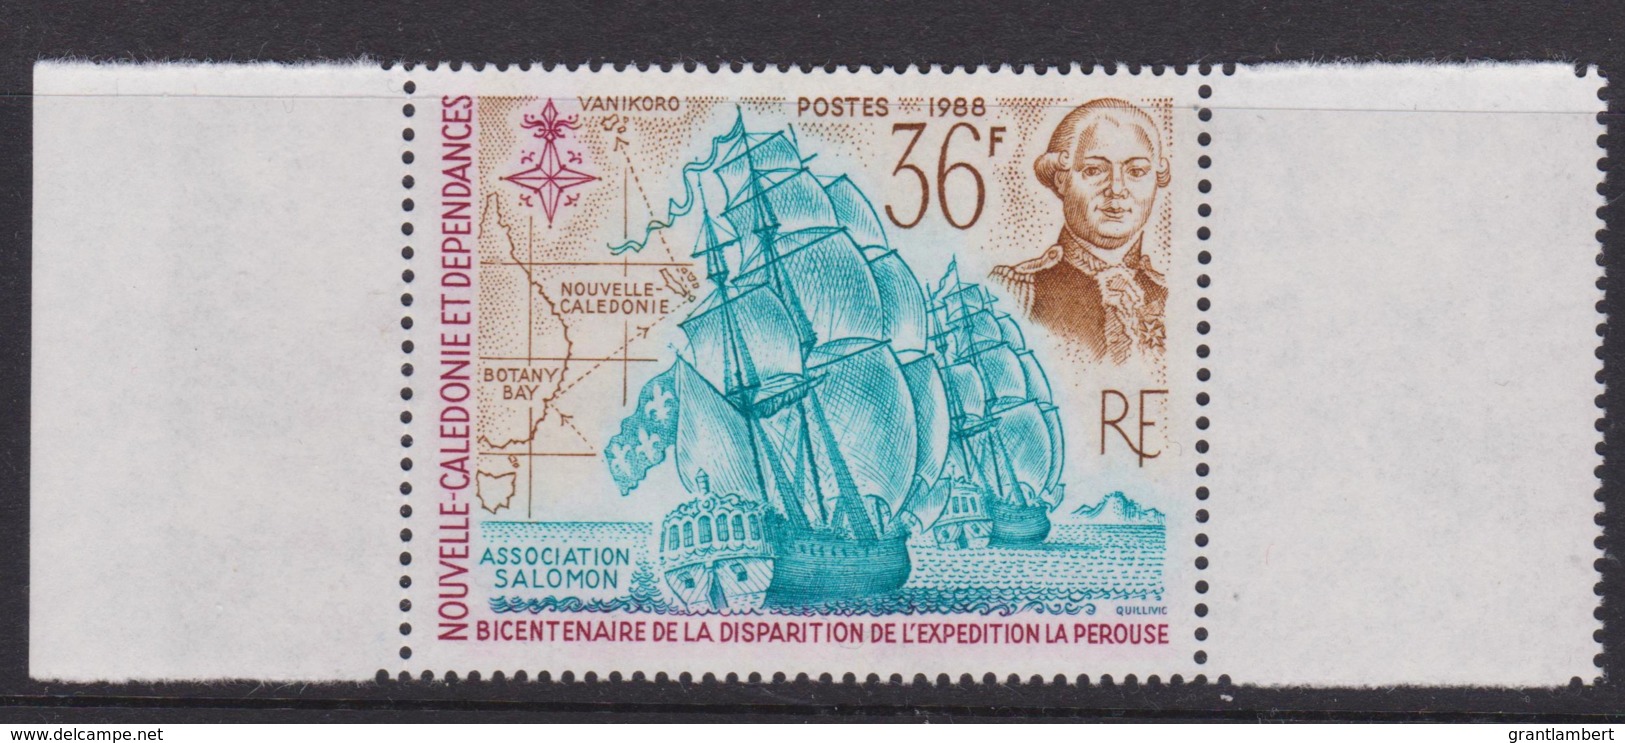 New Caledonia 1988 La Perouse's Expedition Disappearance MNH  SG 823 - Nuovi